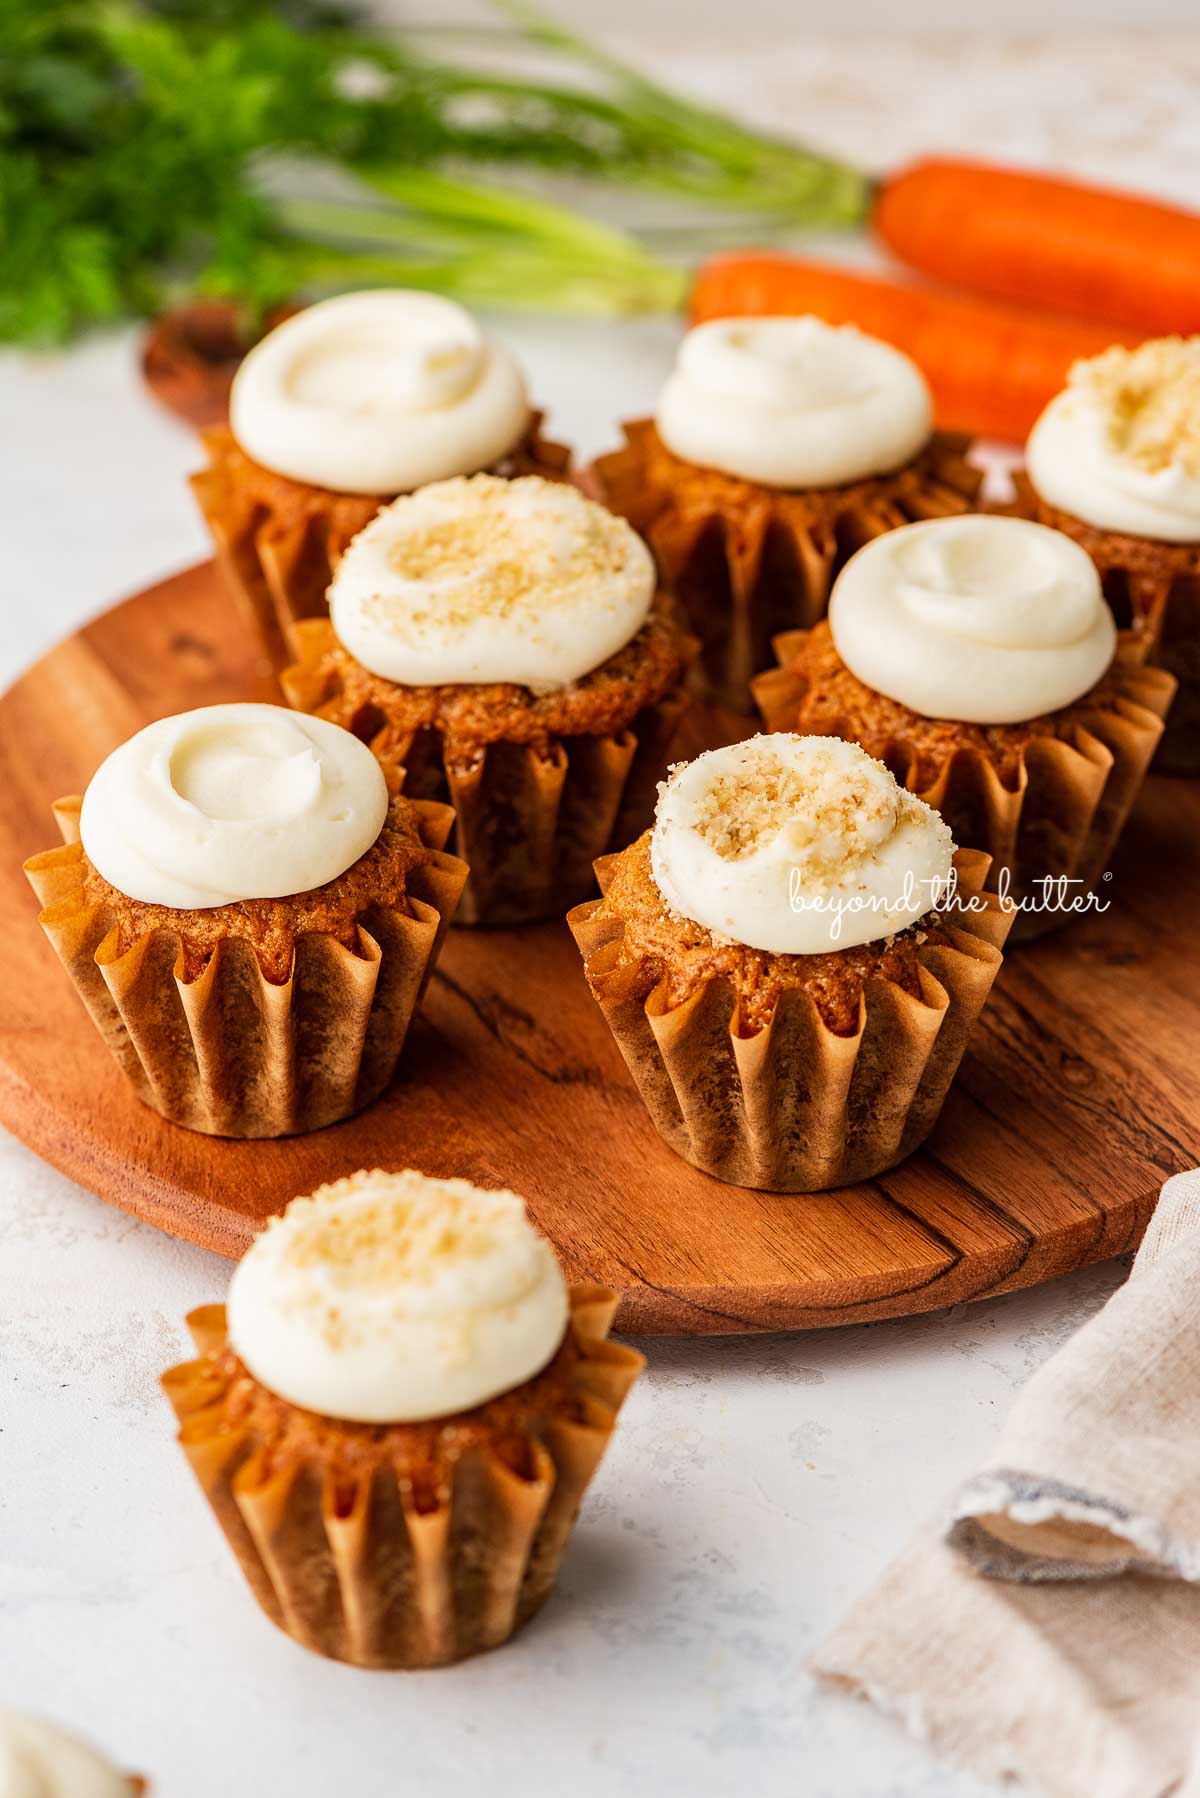 Super moist carrot cake cupcakes with cream cheese frosting placed on a wood cake stand on a white background with some carrots | © Beyond the Butter®